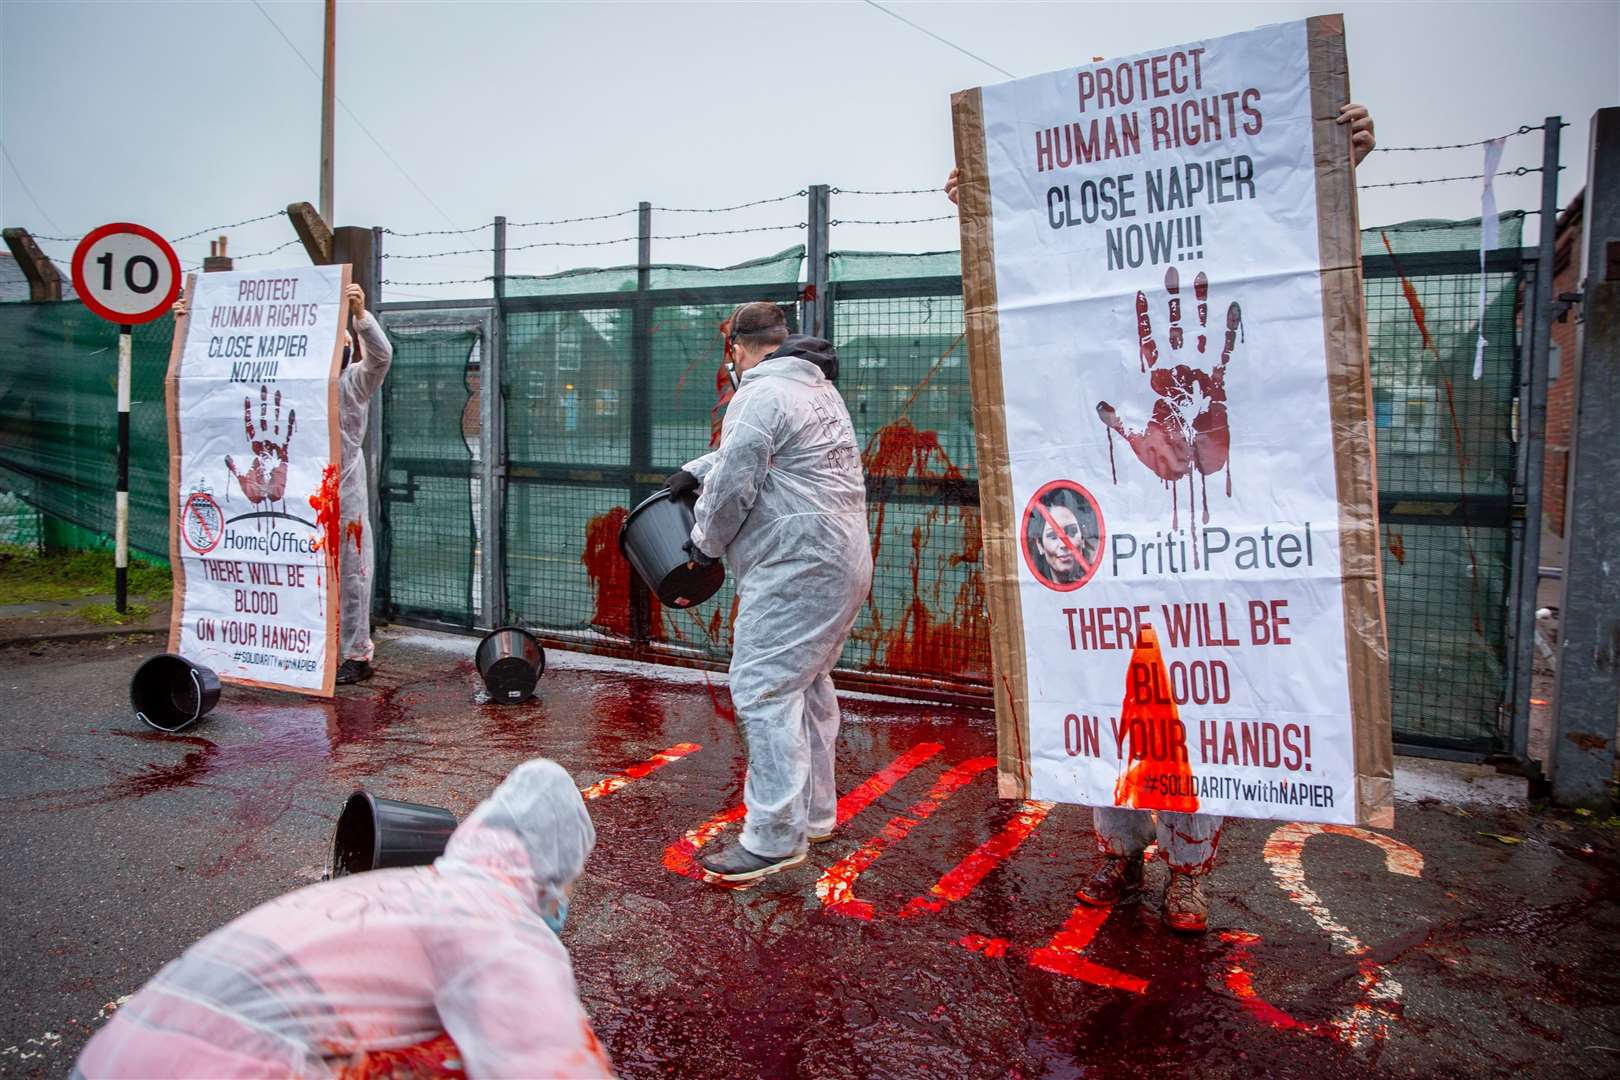 On January 28, human rights activists demonstrated against the conditions at the barracks, saying the Home Office would 'have blood on its hands'. Picture:Andrew Aitchison/Getty Images